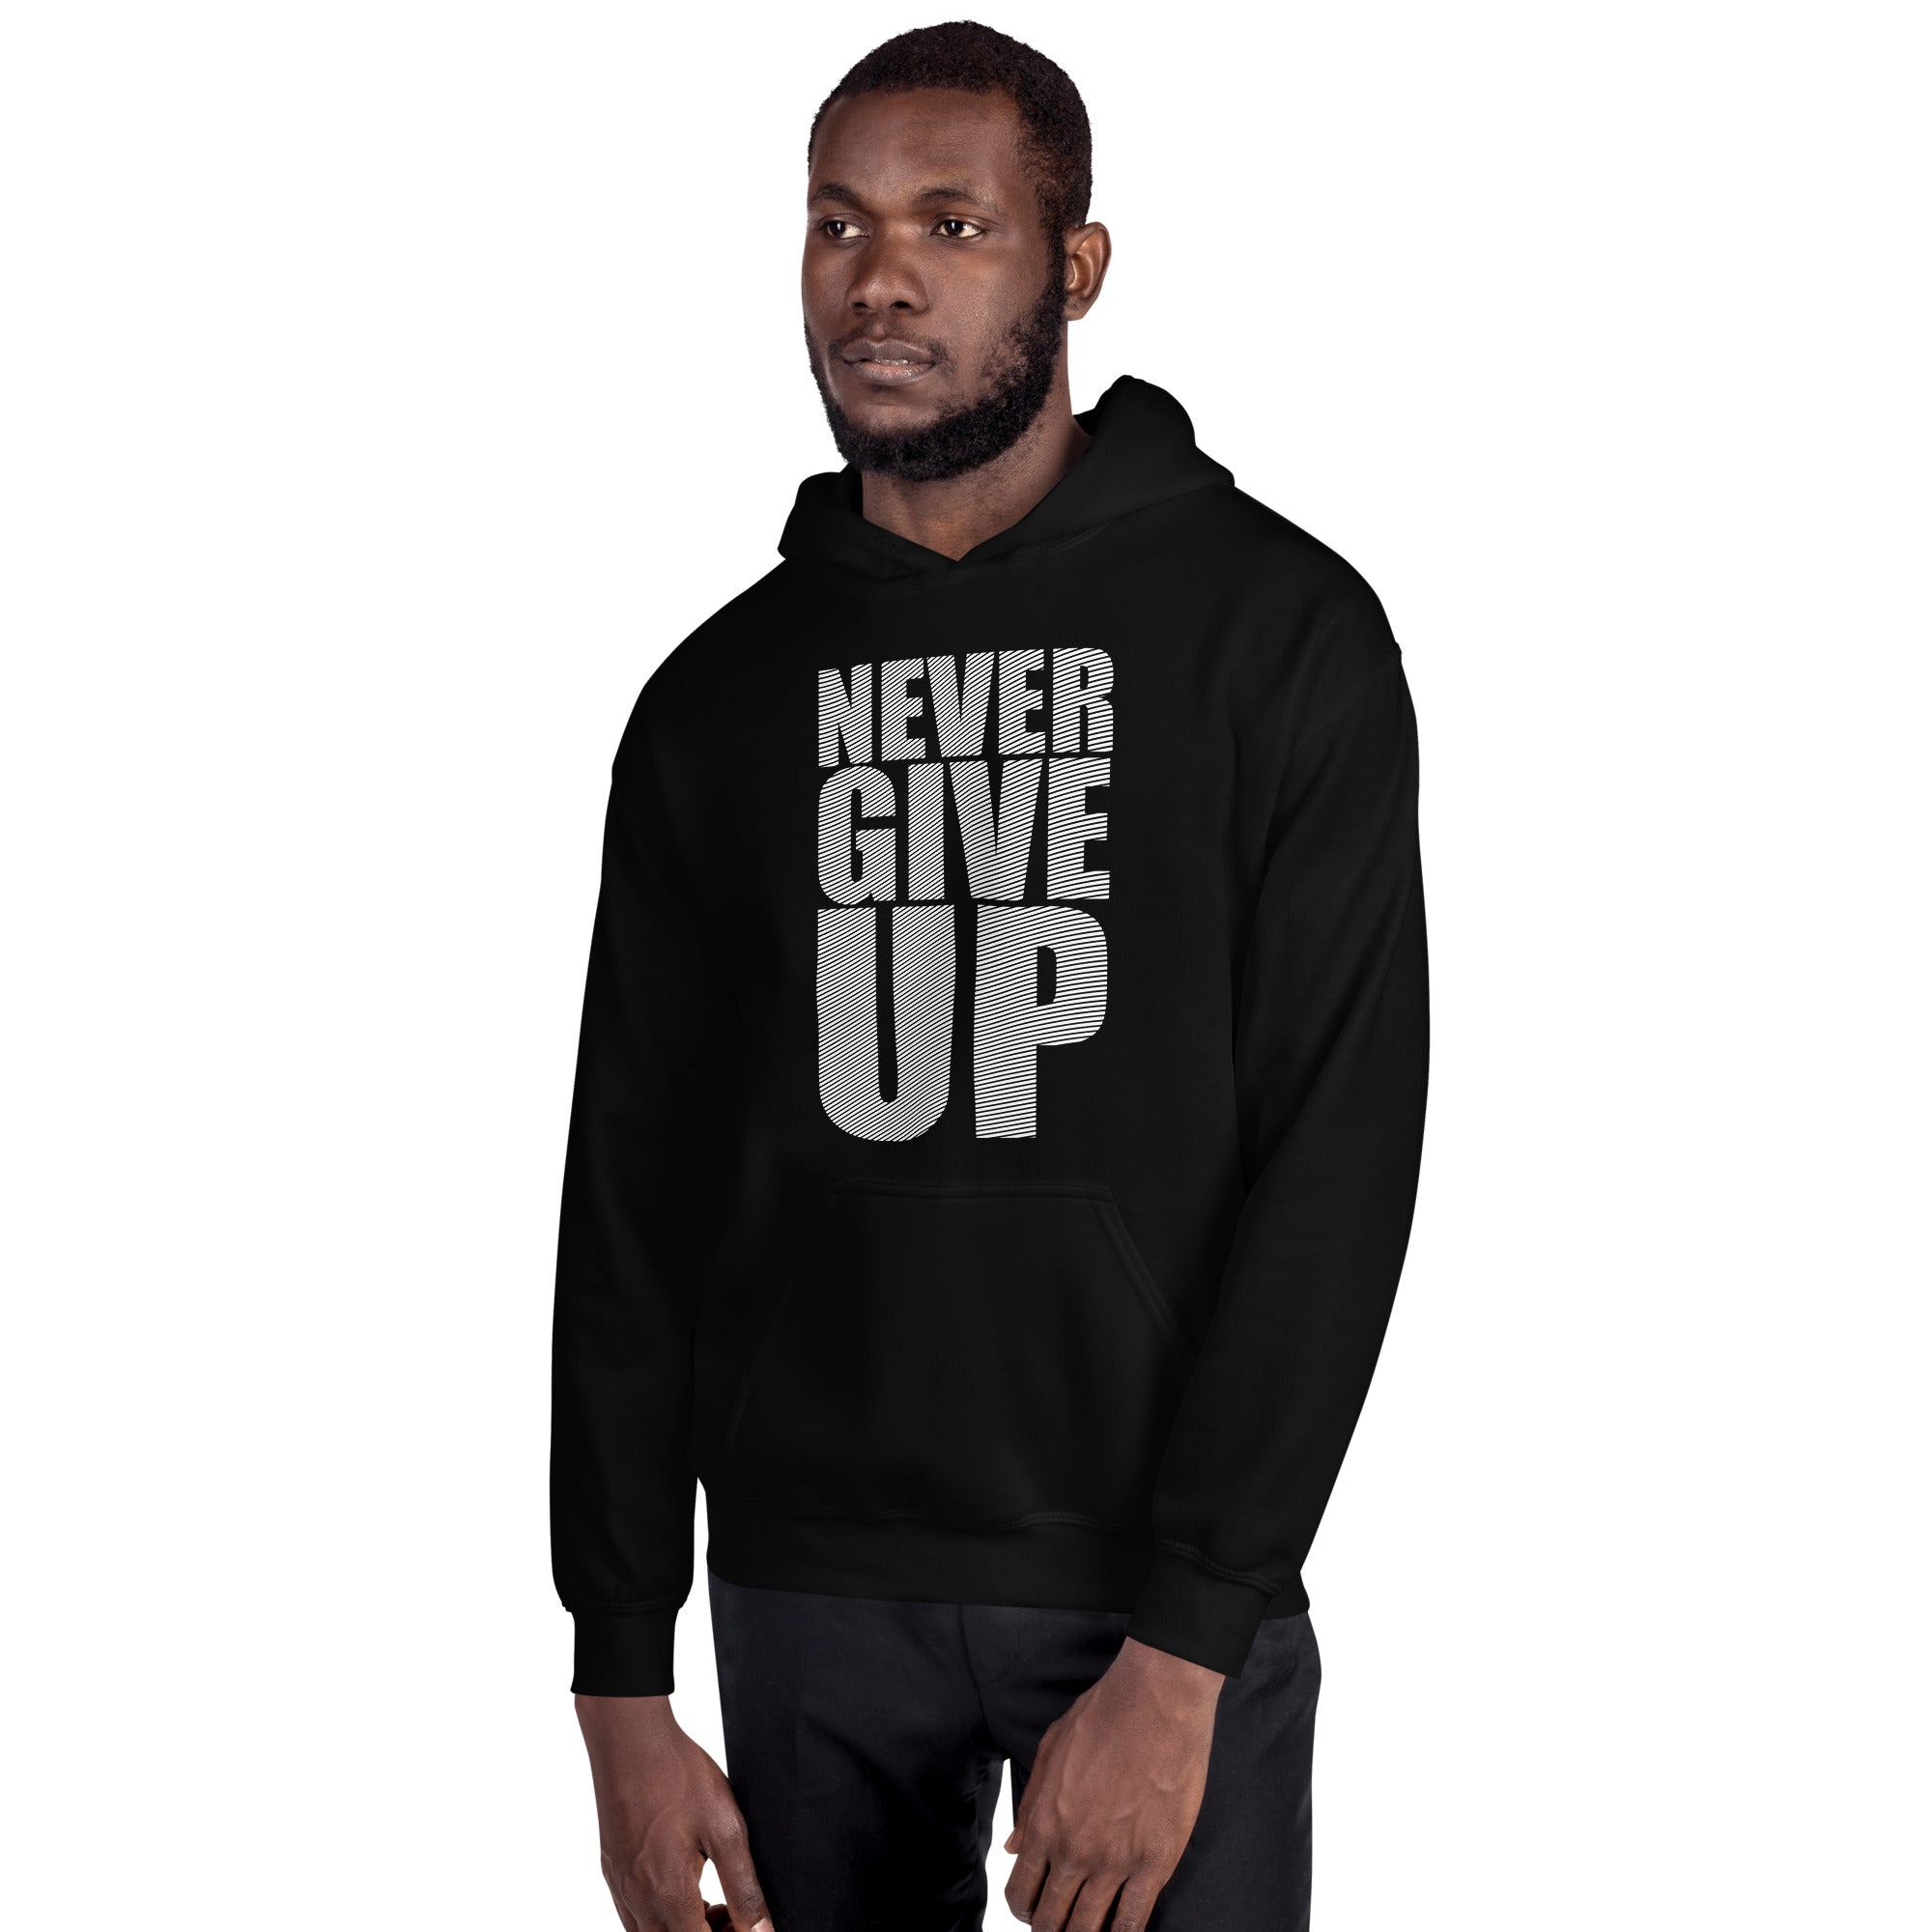 Never Give Up - Unisex Hoodie